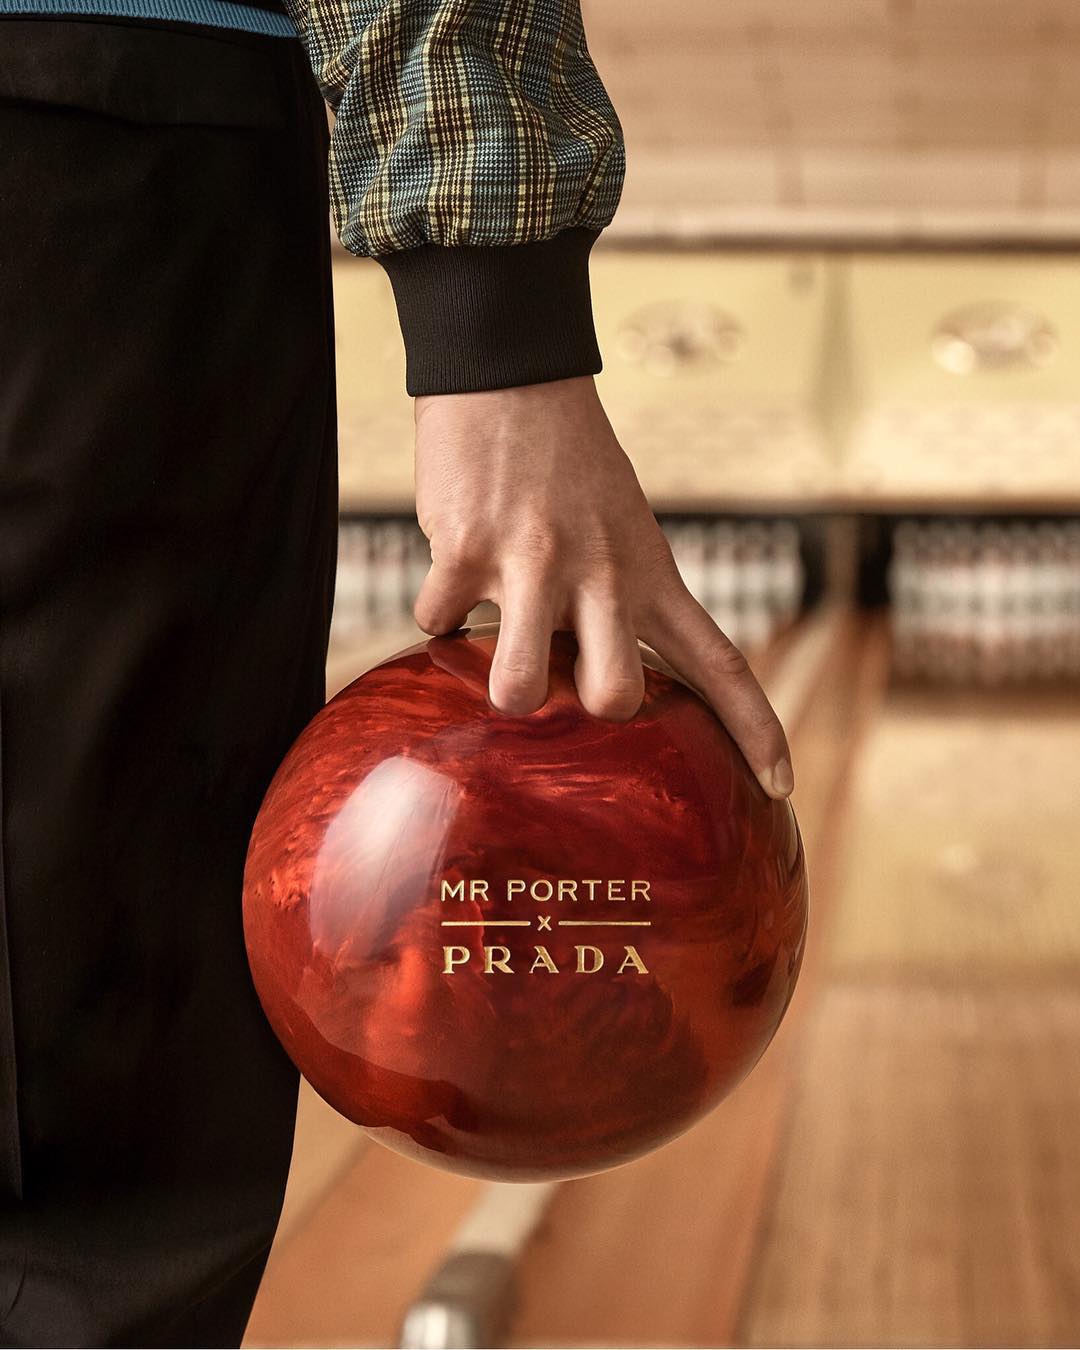 Introducing the MR PORTER x Prada bowling collection — Hashtag Legend